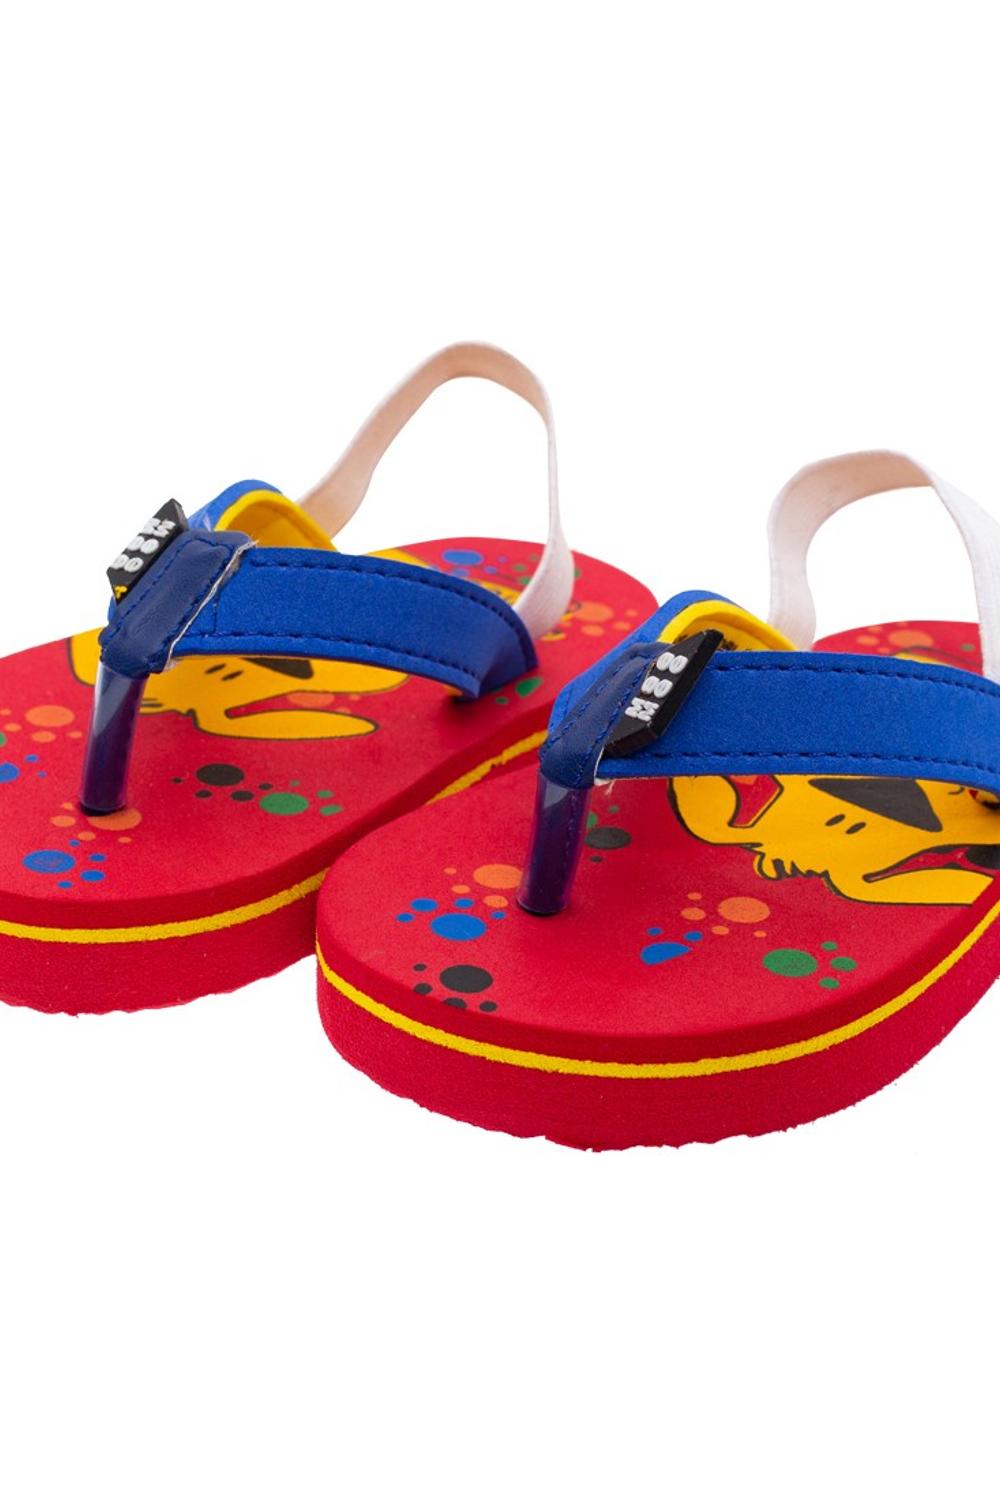 Mee Mee Unisex Flip-Flops and House Slippers, Red_Blue